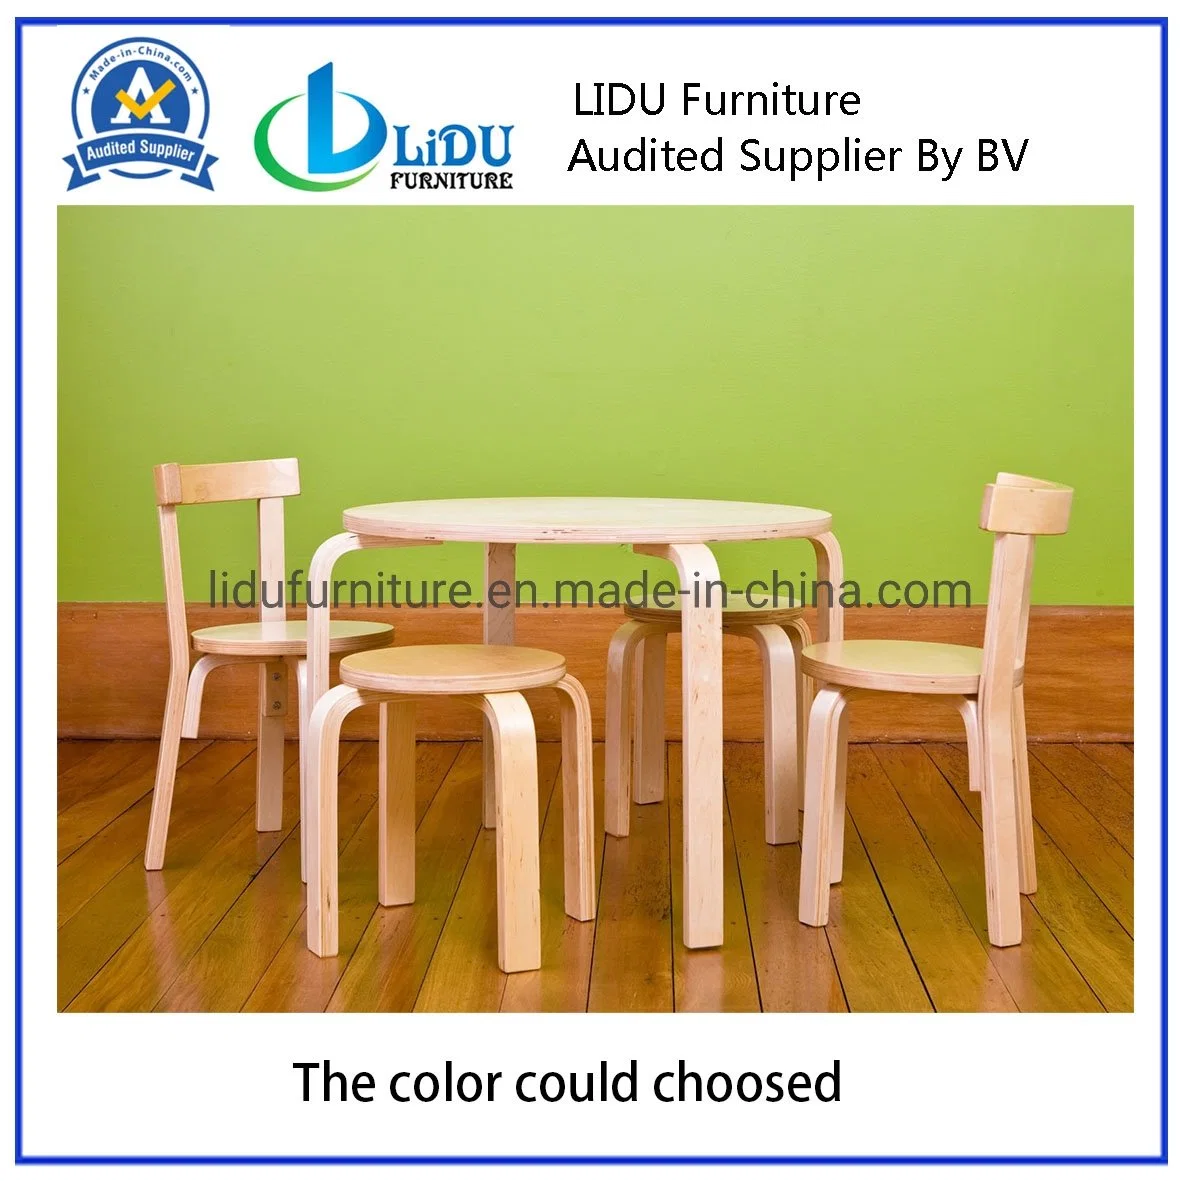 New Wooden Children Table for Child, High Quality Wooden Baby Table Hot Sale Wooden Kids Table